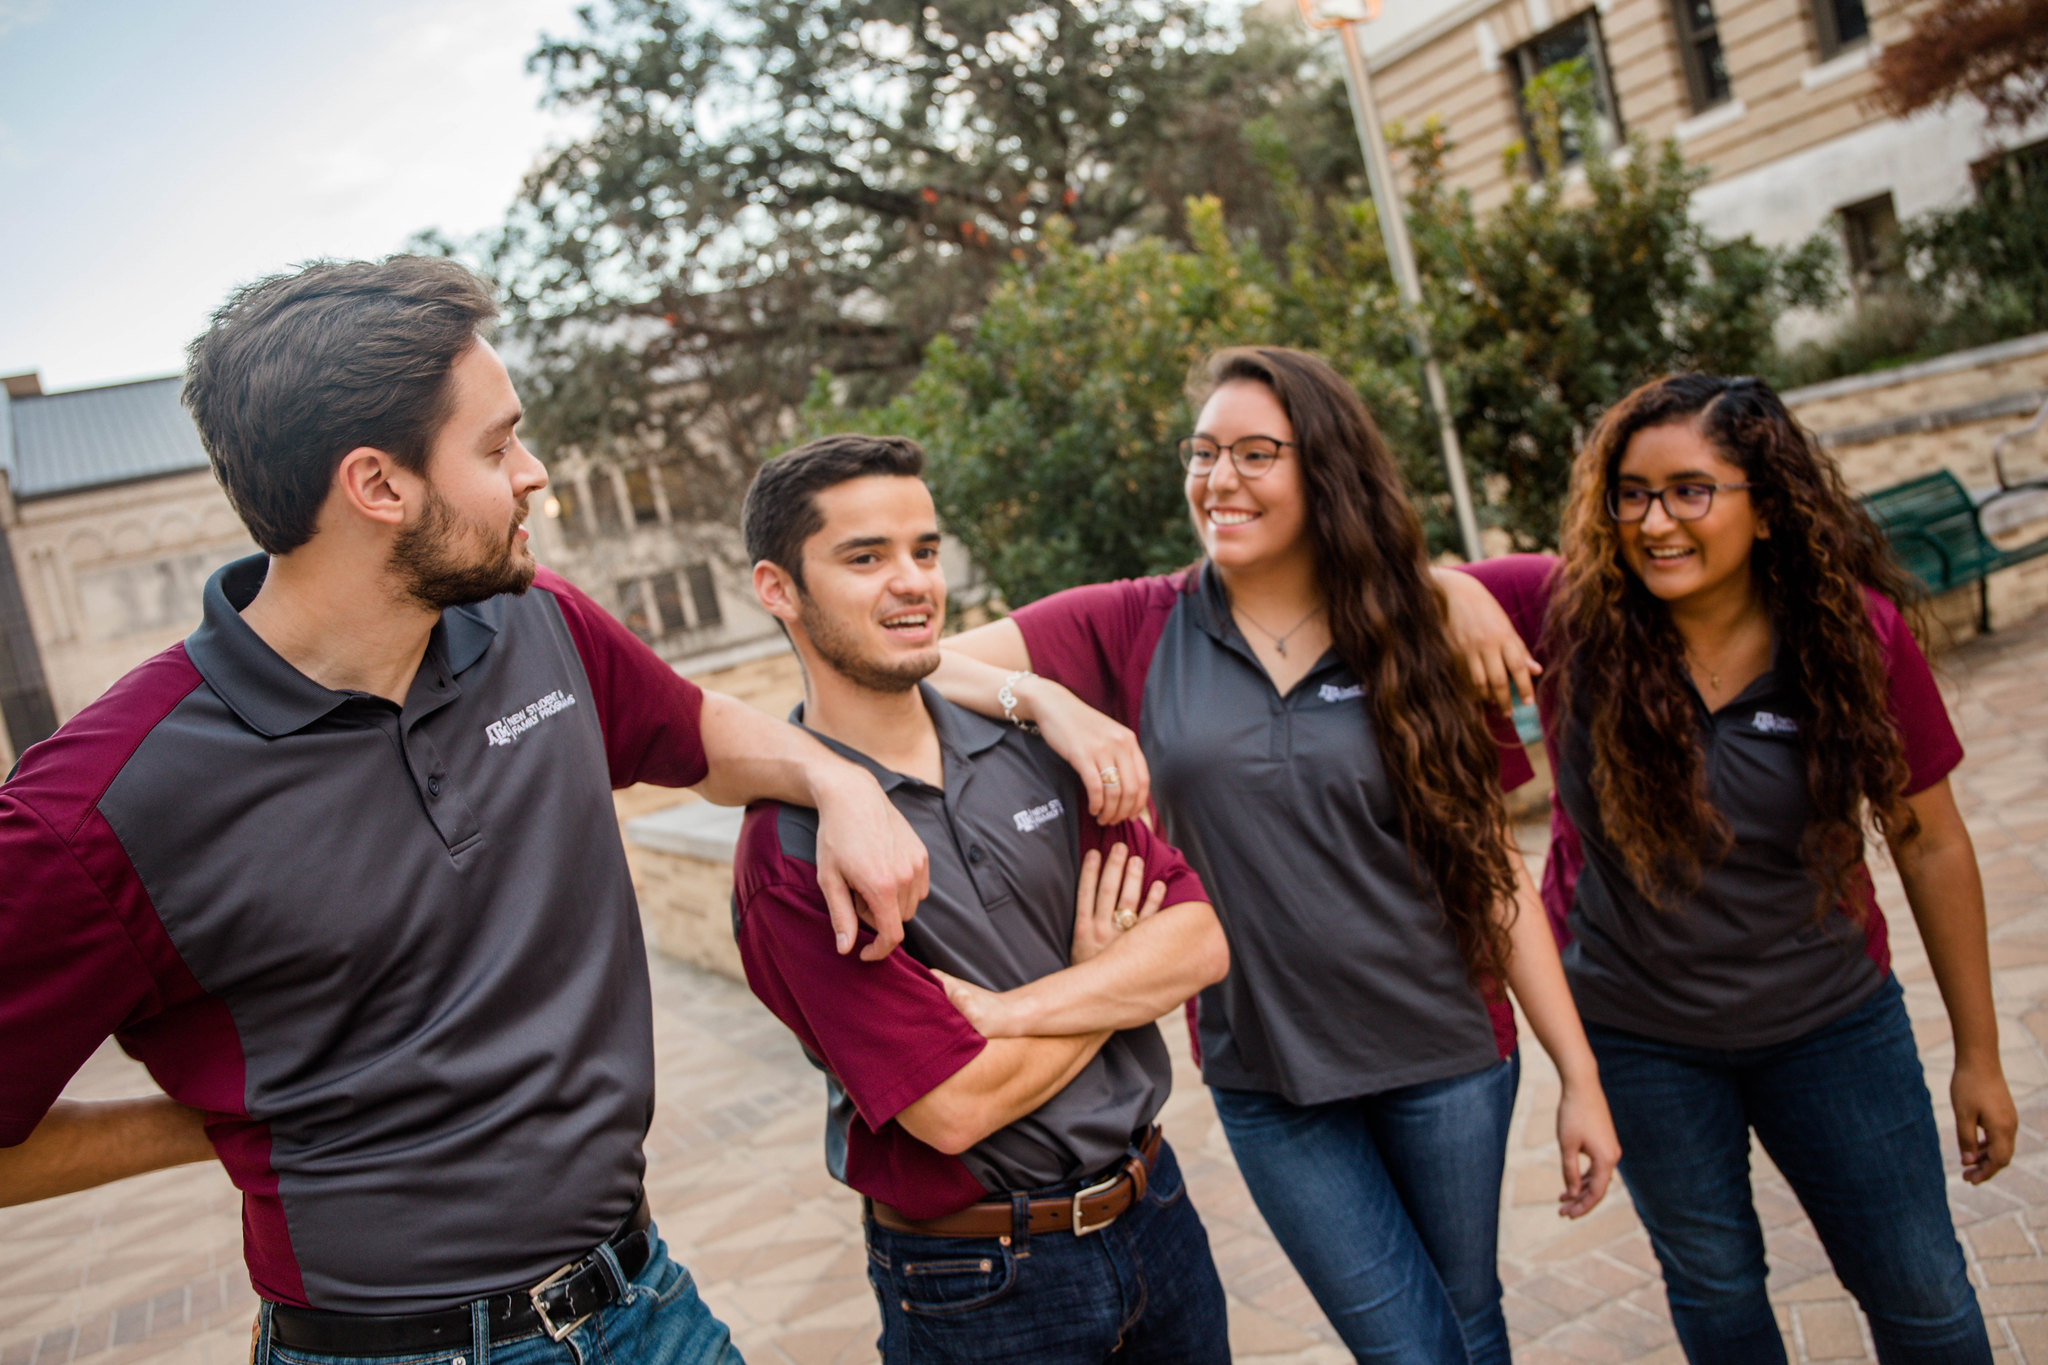 Group of 4 students in Aggie Familia polo shirts. 